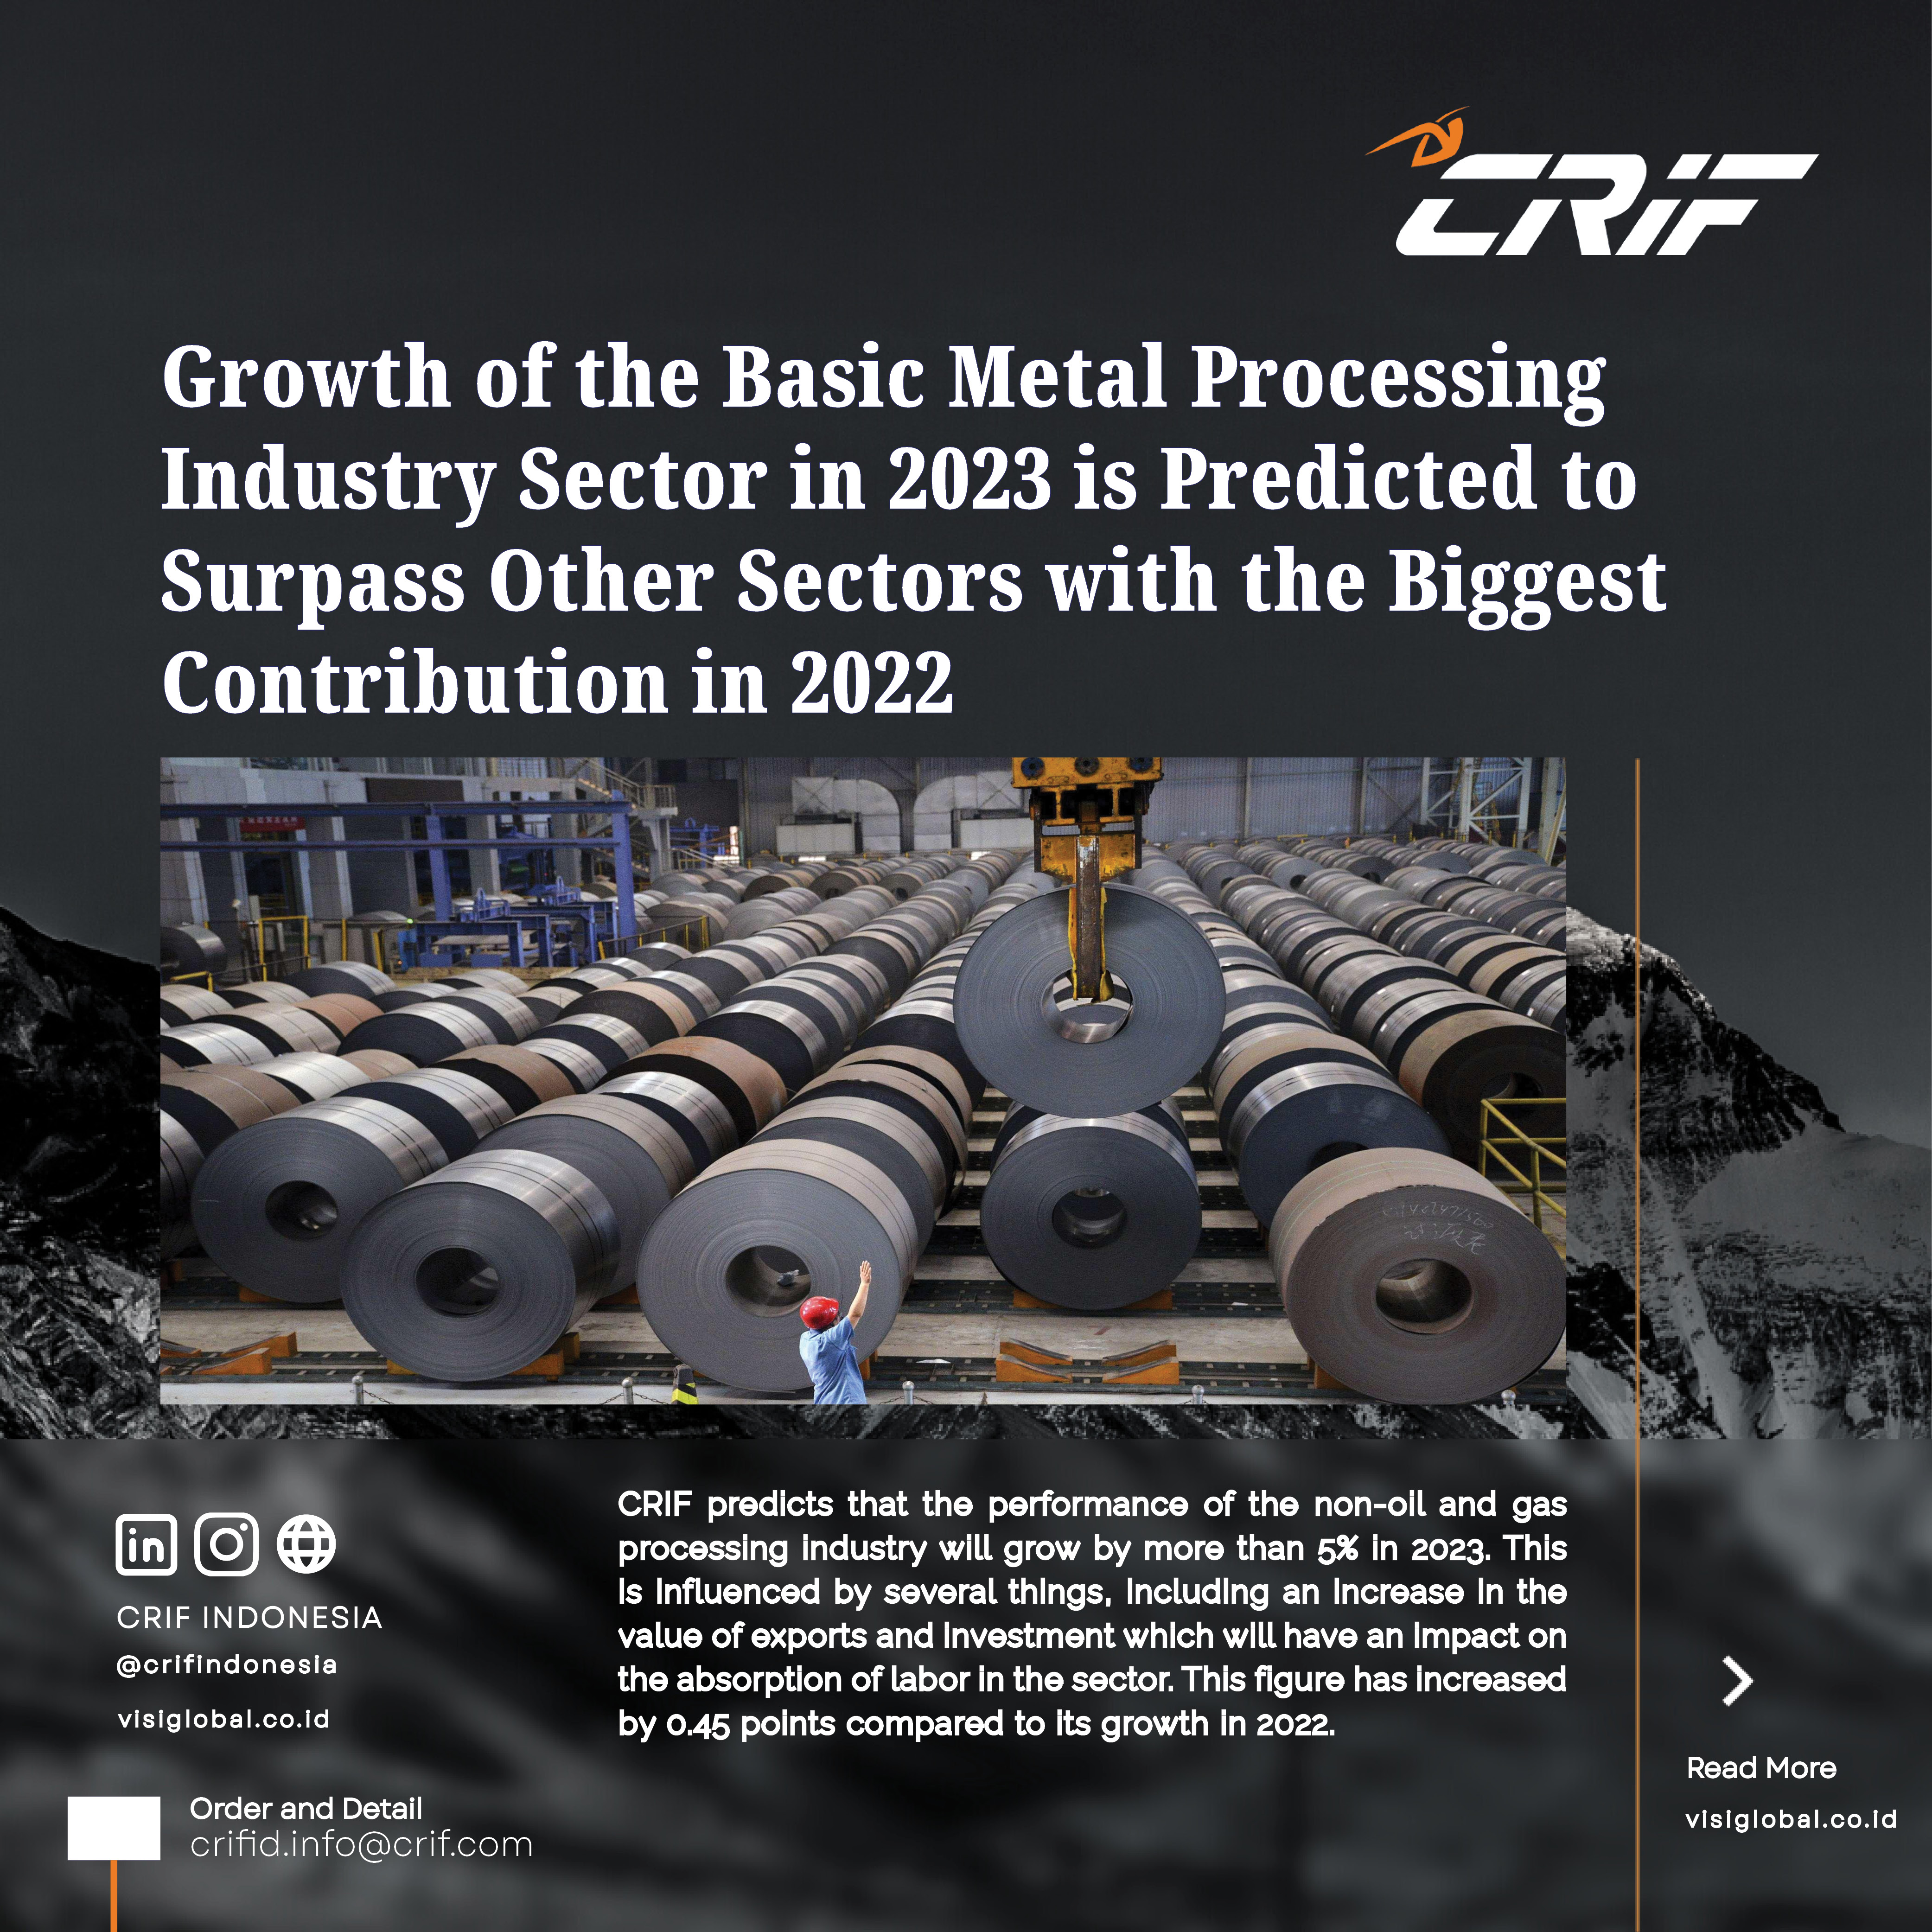 Growth of the Basic Metal Processing Industry Sector in 2023 is Predicted to Surpass Other Sectors with the Biggest Contribution in 2022